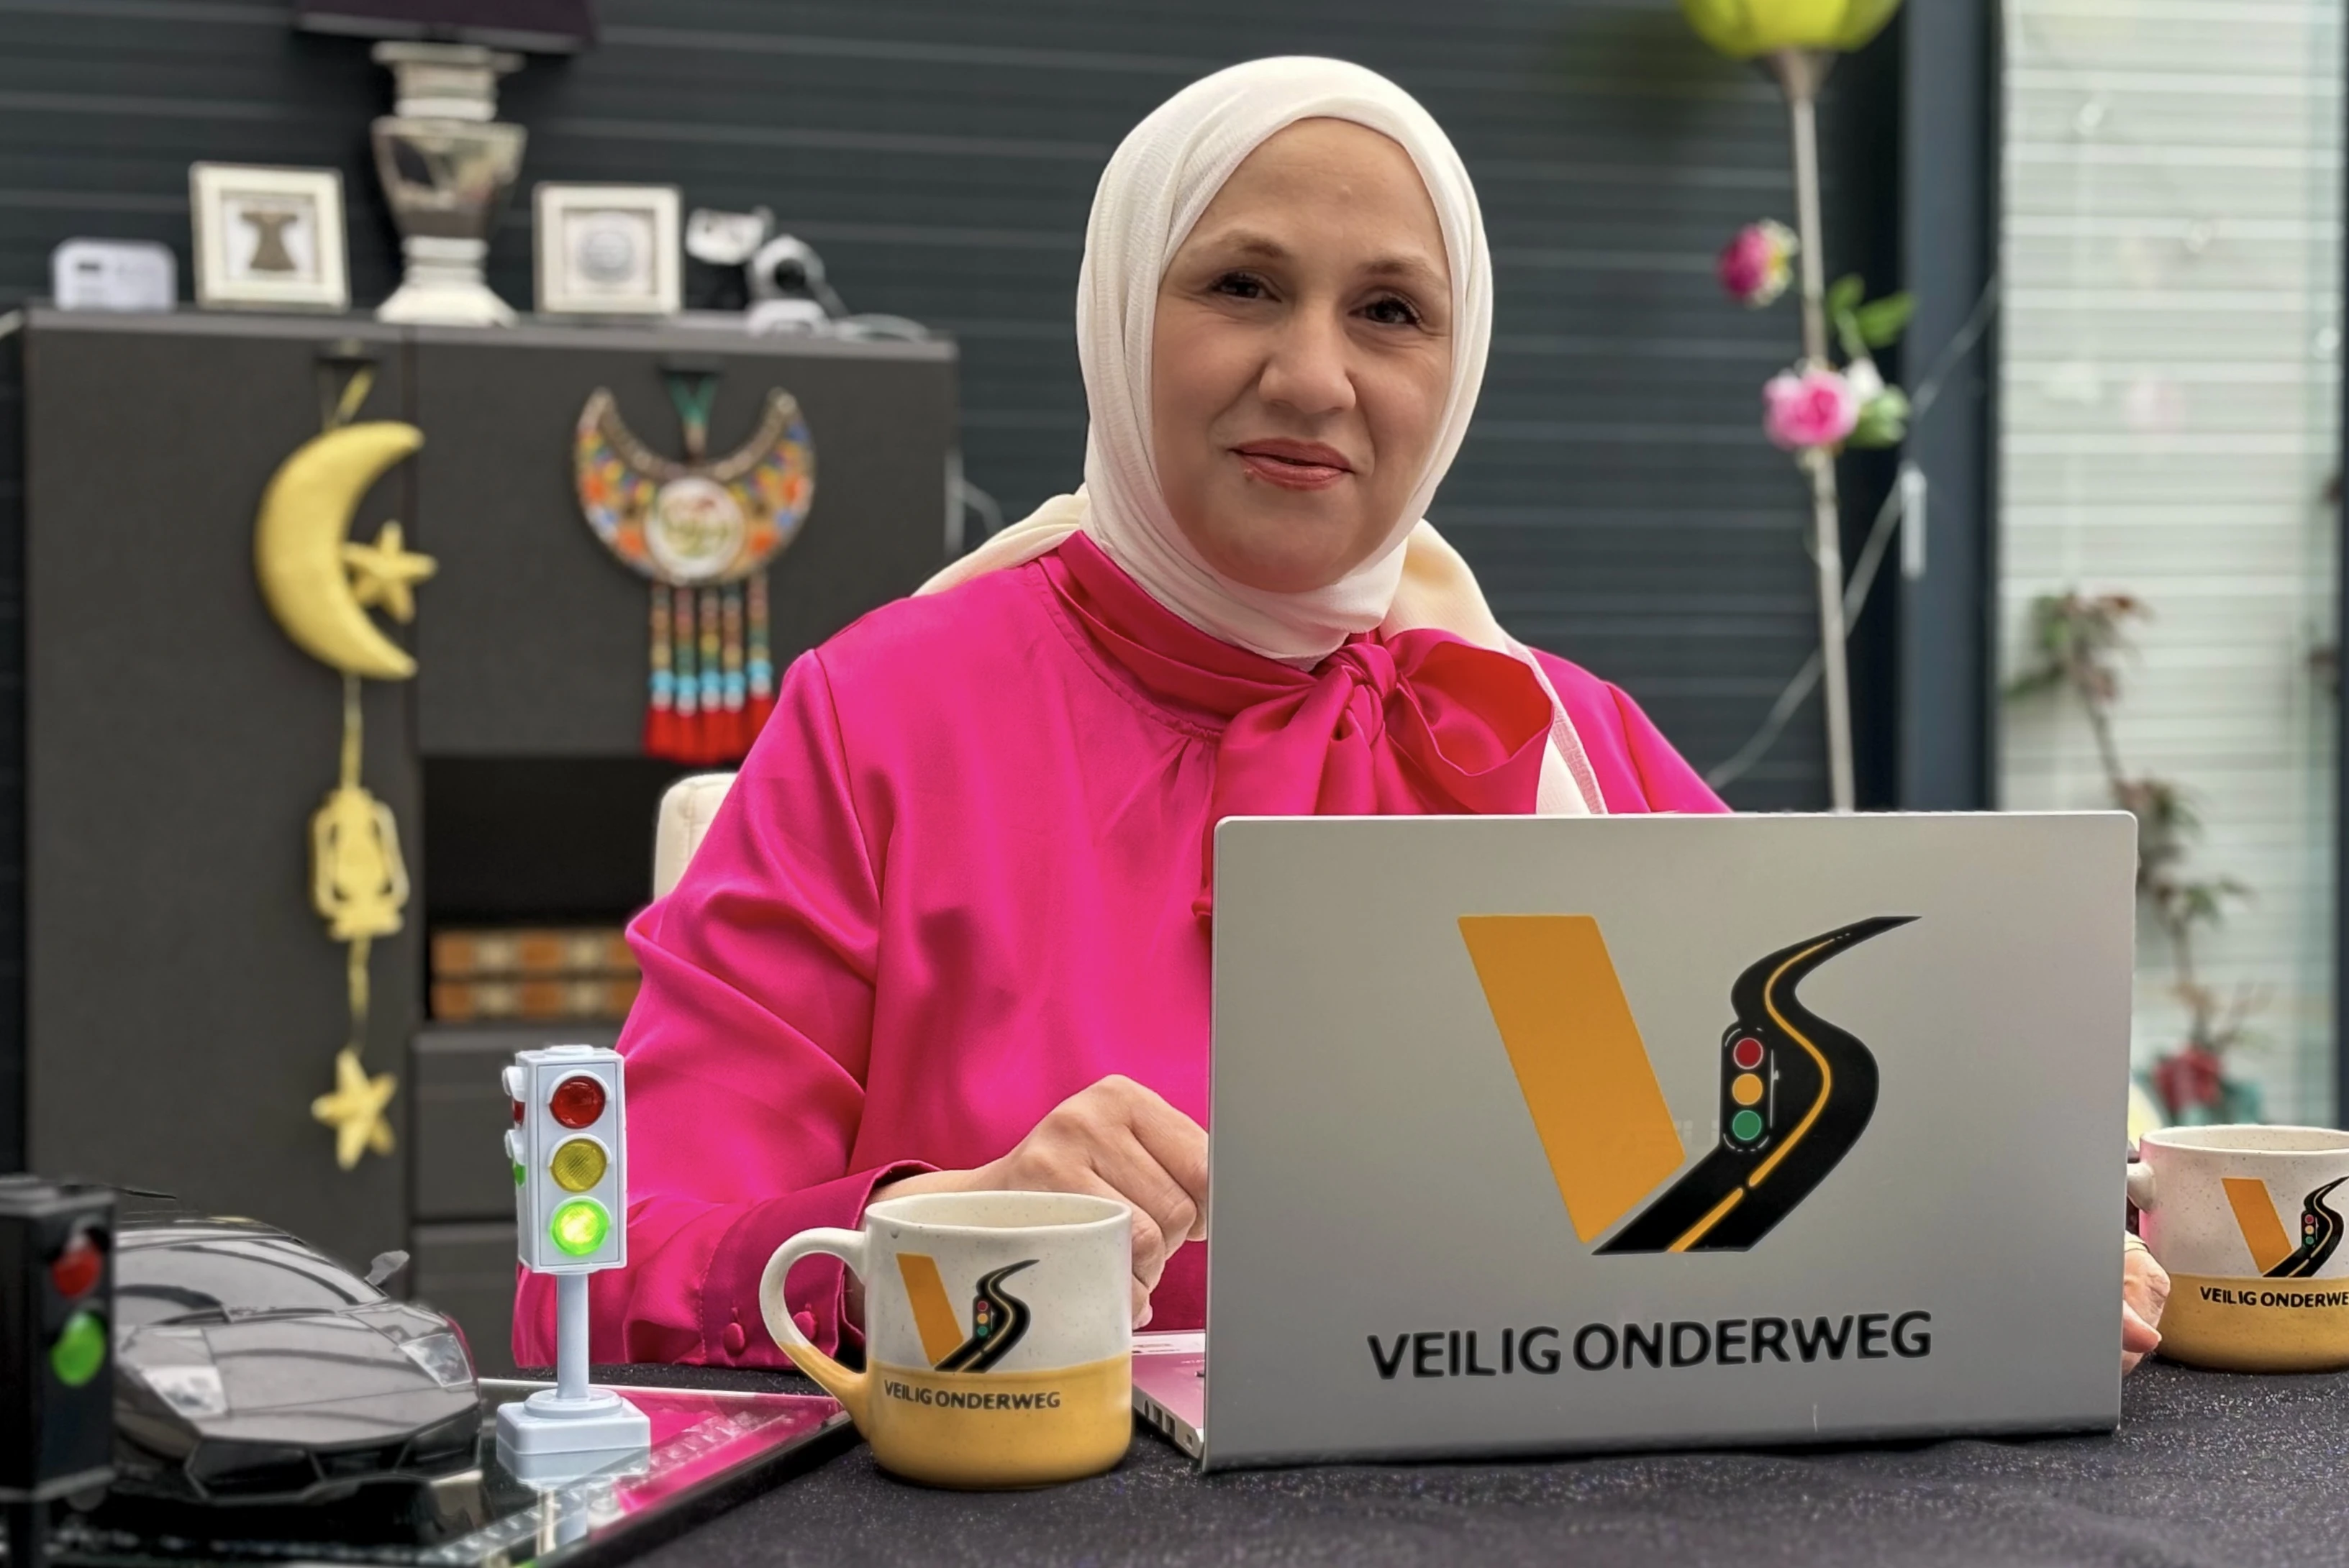 Loubna Bazarbashi gives theory traffic lessons with her company 'Veilig Onderweg'. Loubna sits behind her laptop.